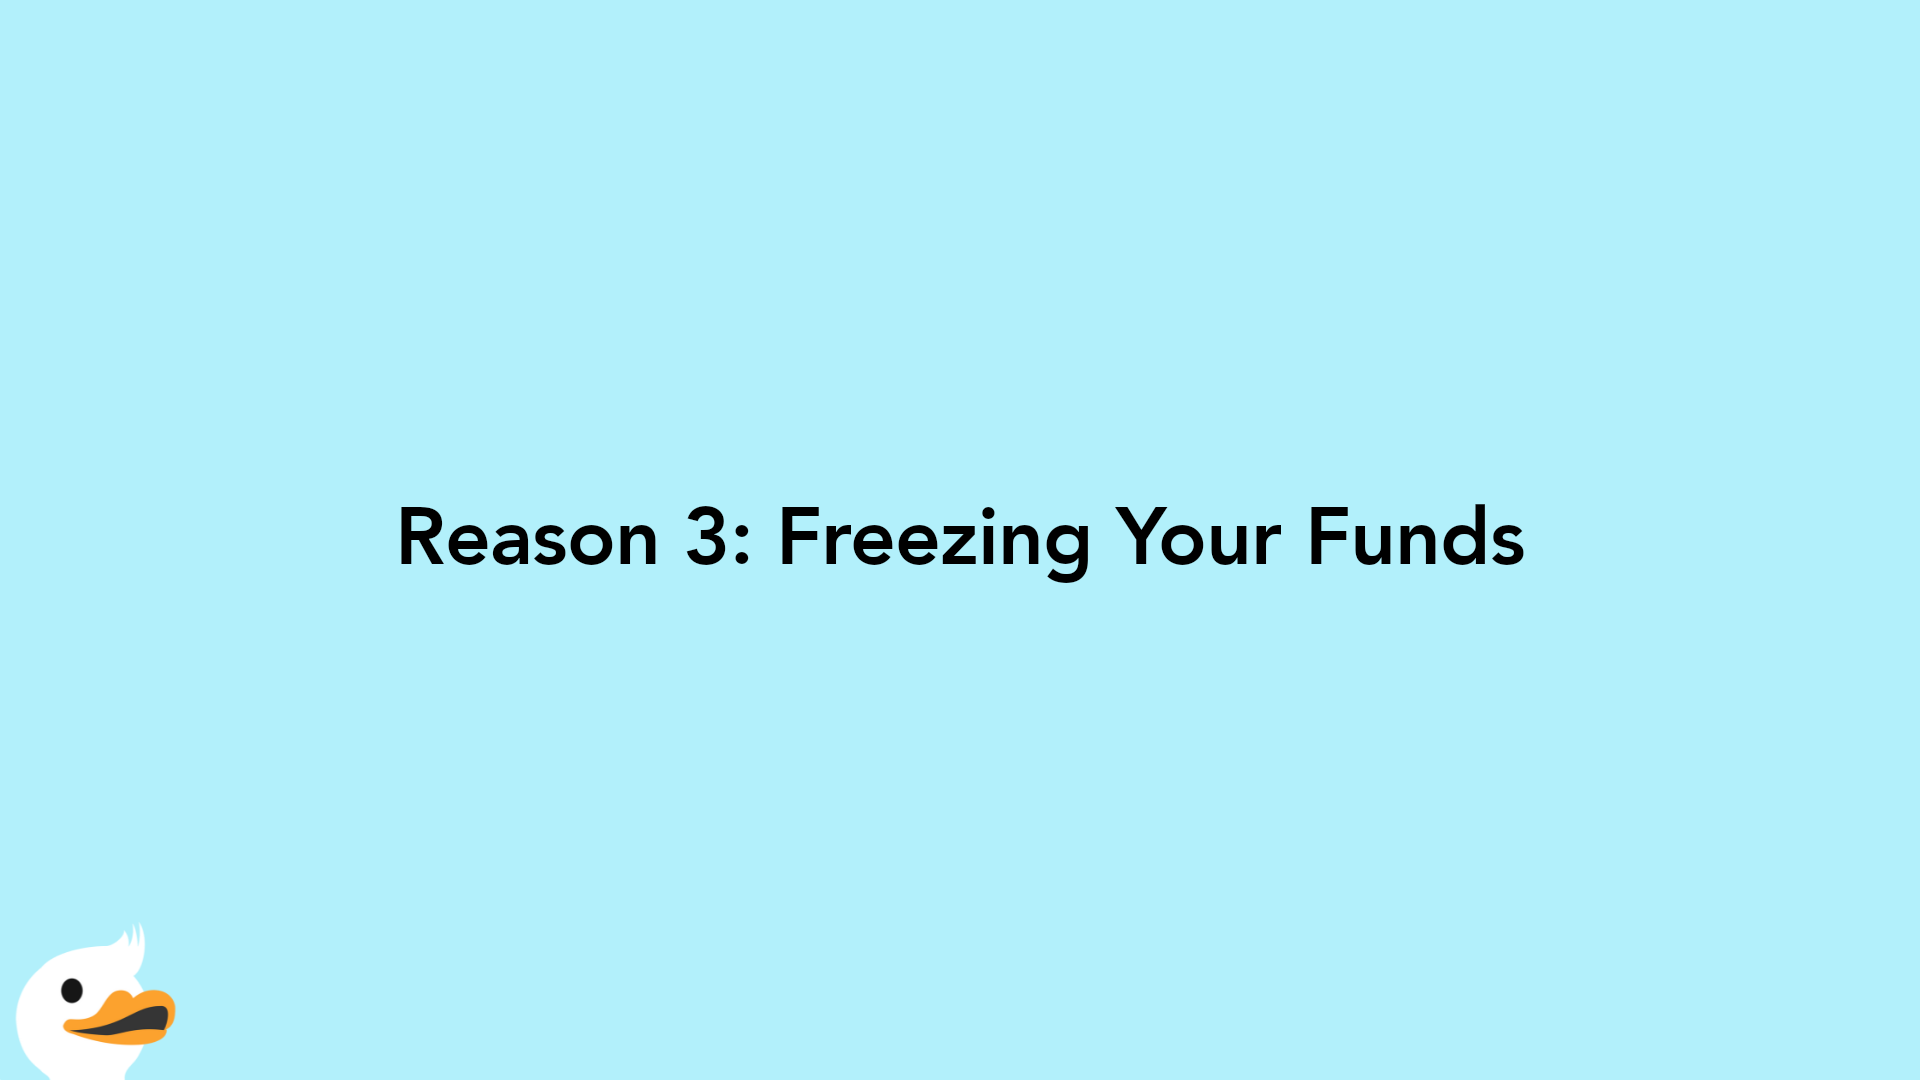 Reason 3: Freezing Your Funds